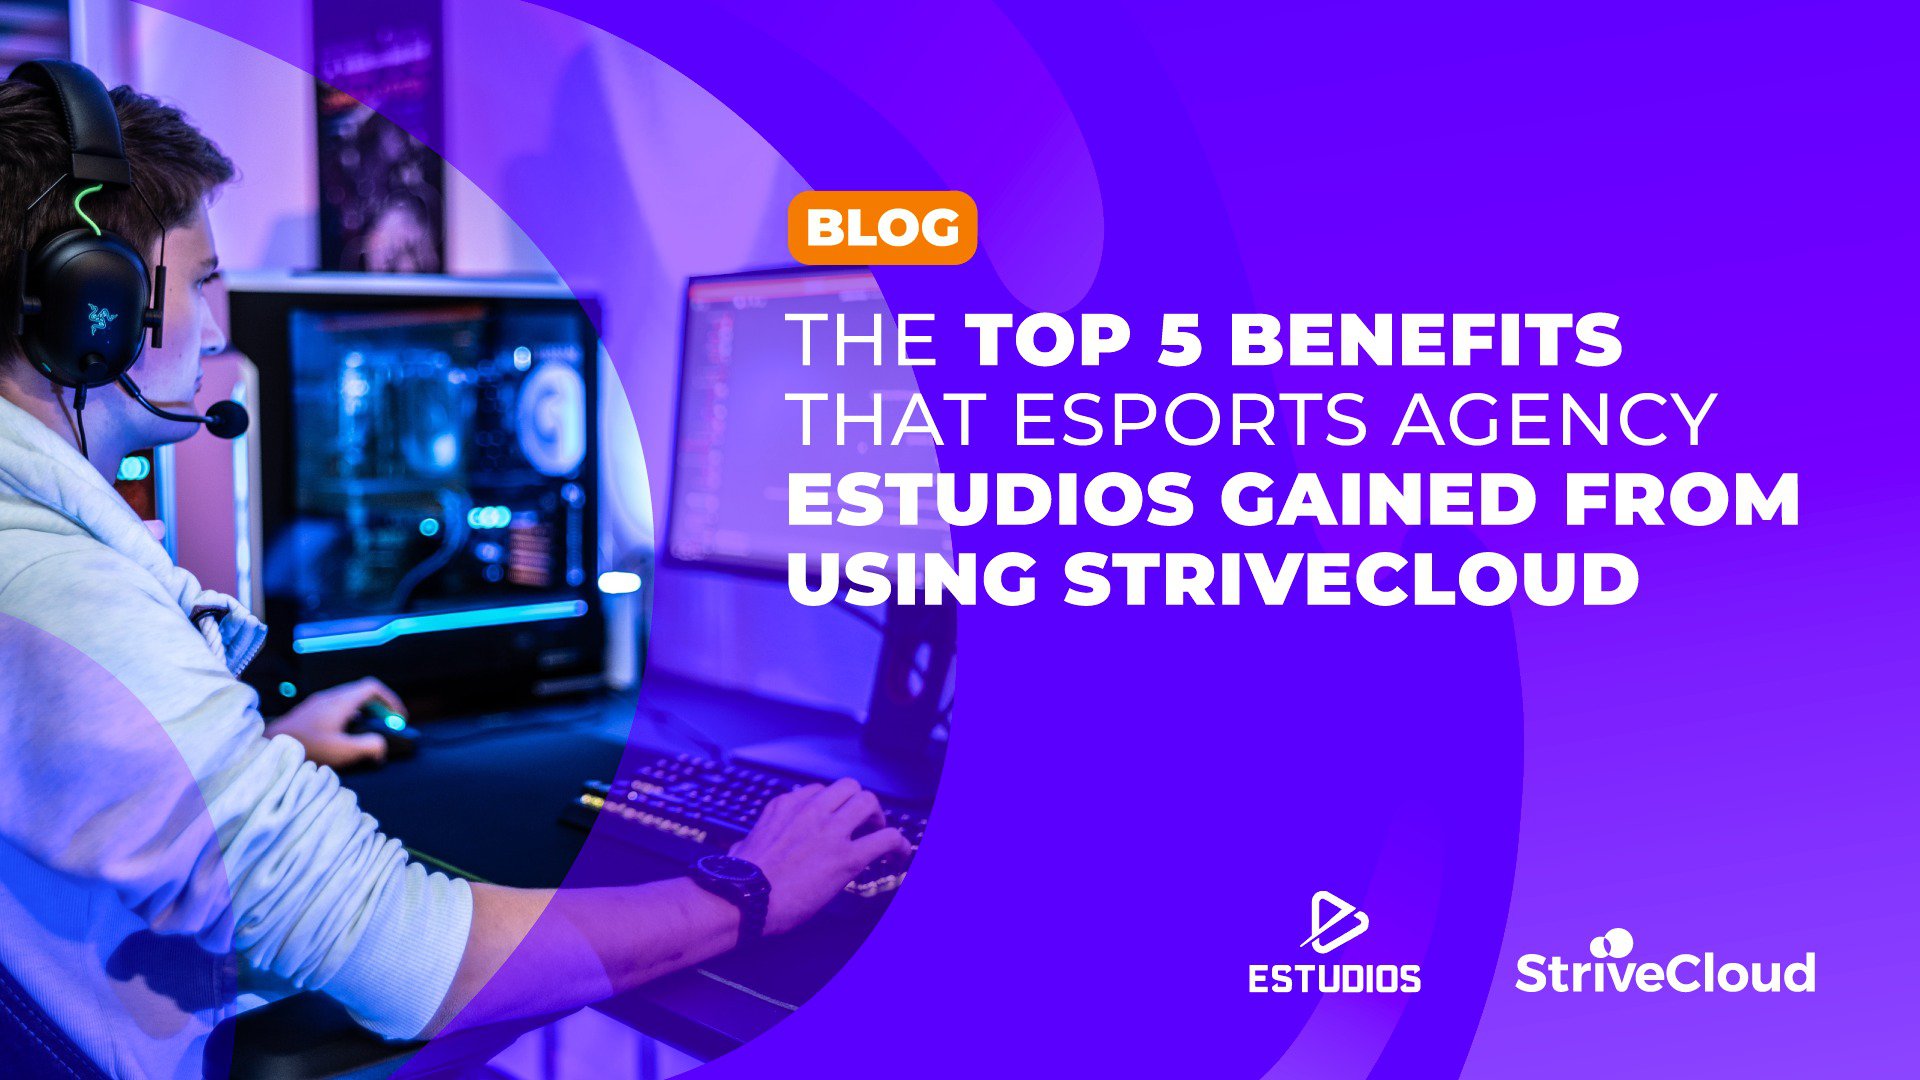 The top 5 benefits that esports agency ESTUDIOS gained from using StriveCloud cover